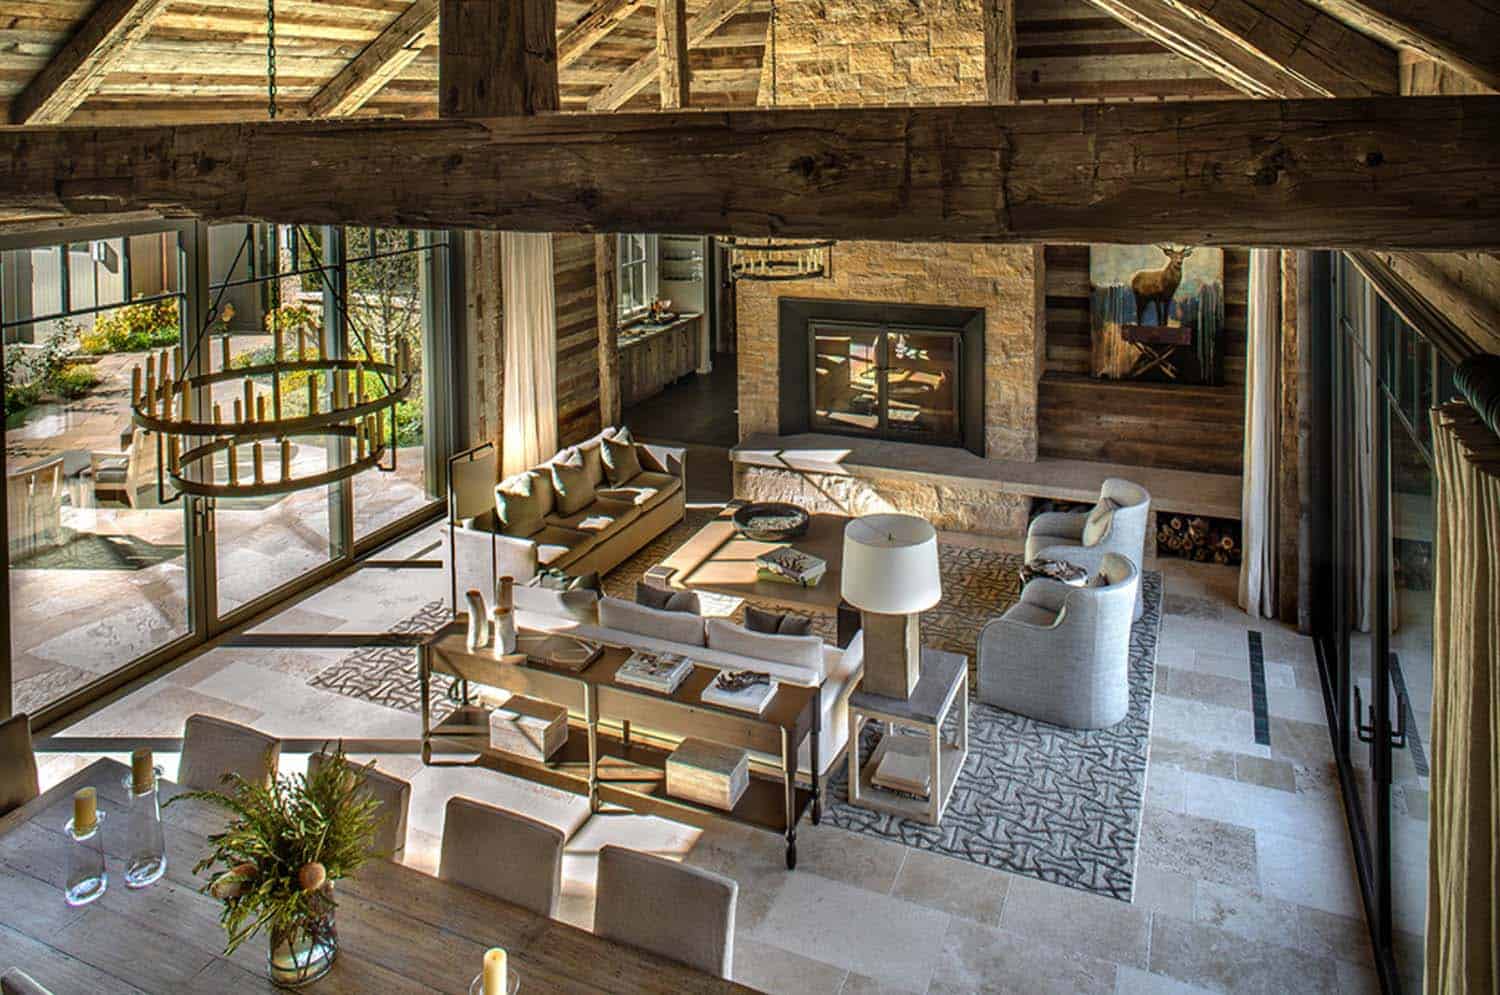 Beautifully styled mountain home on the East Fork, Idaho